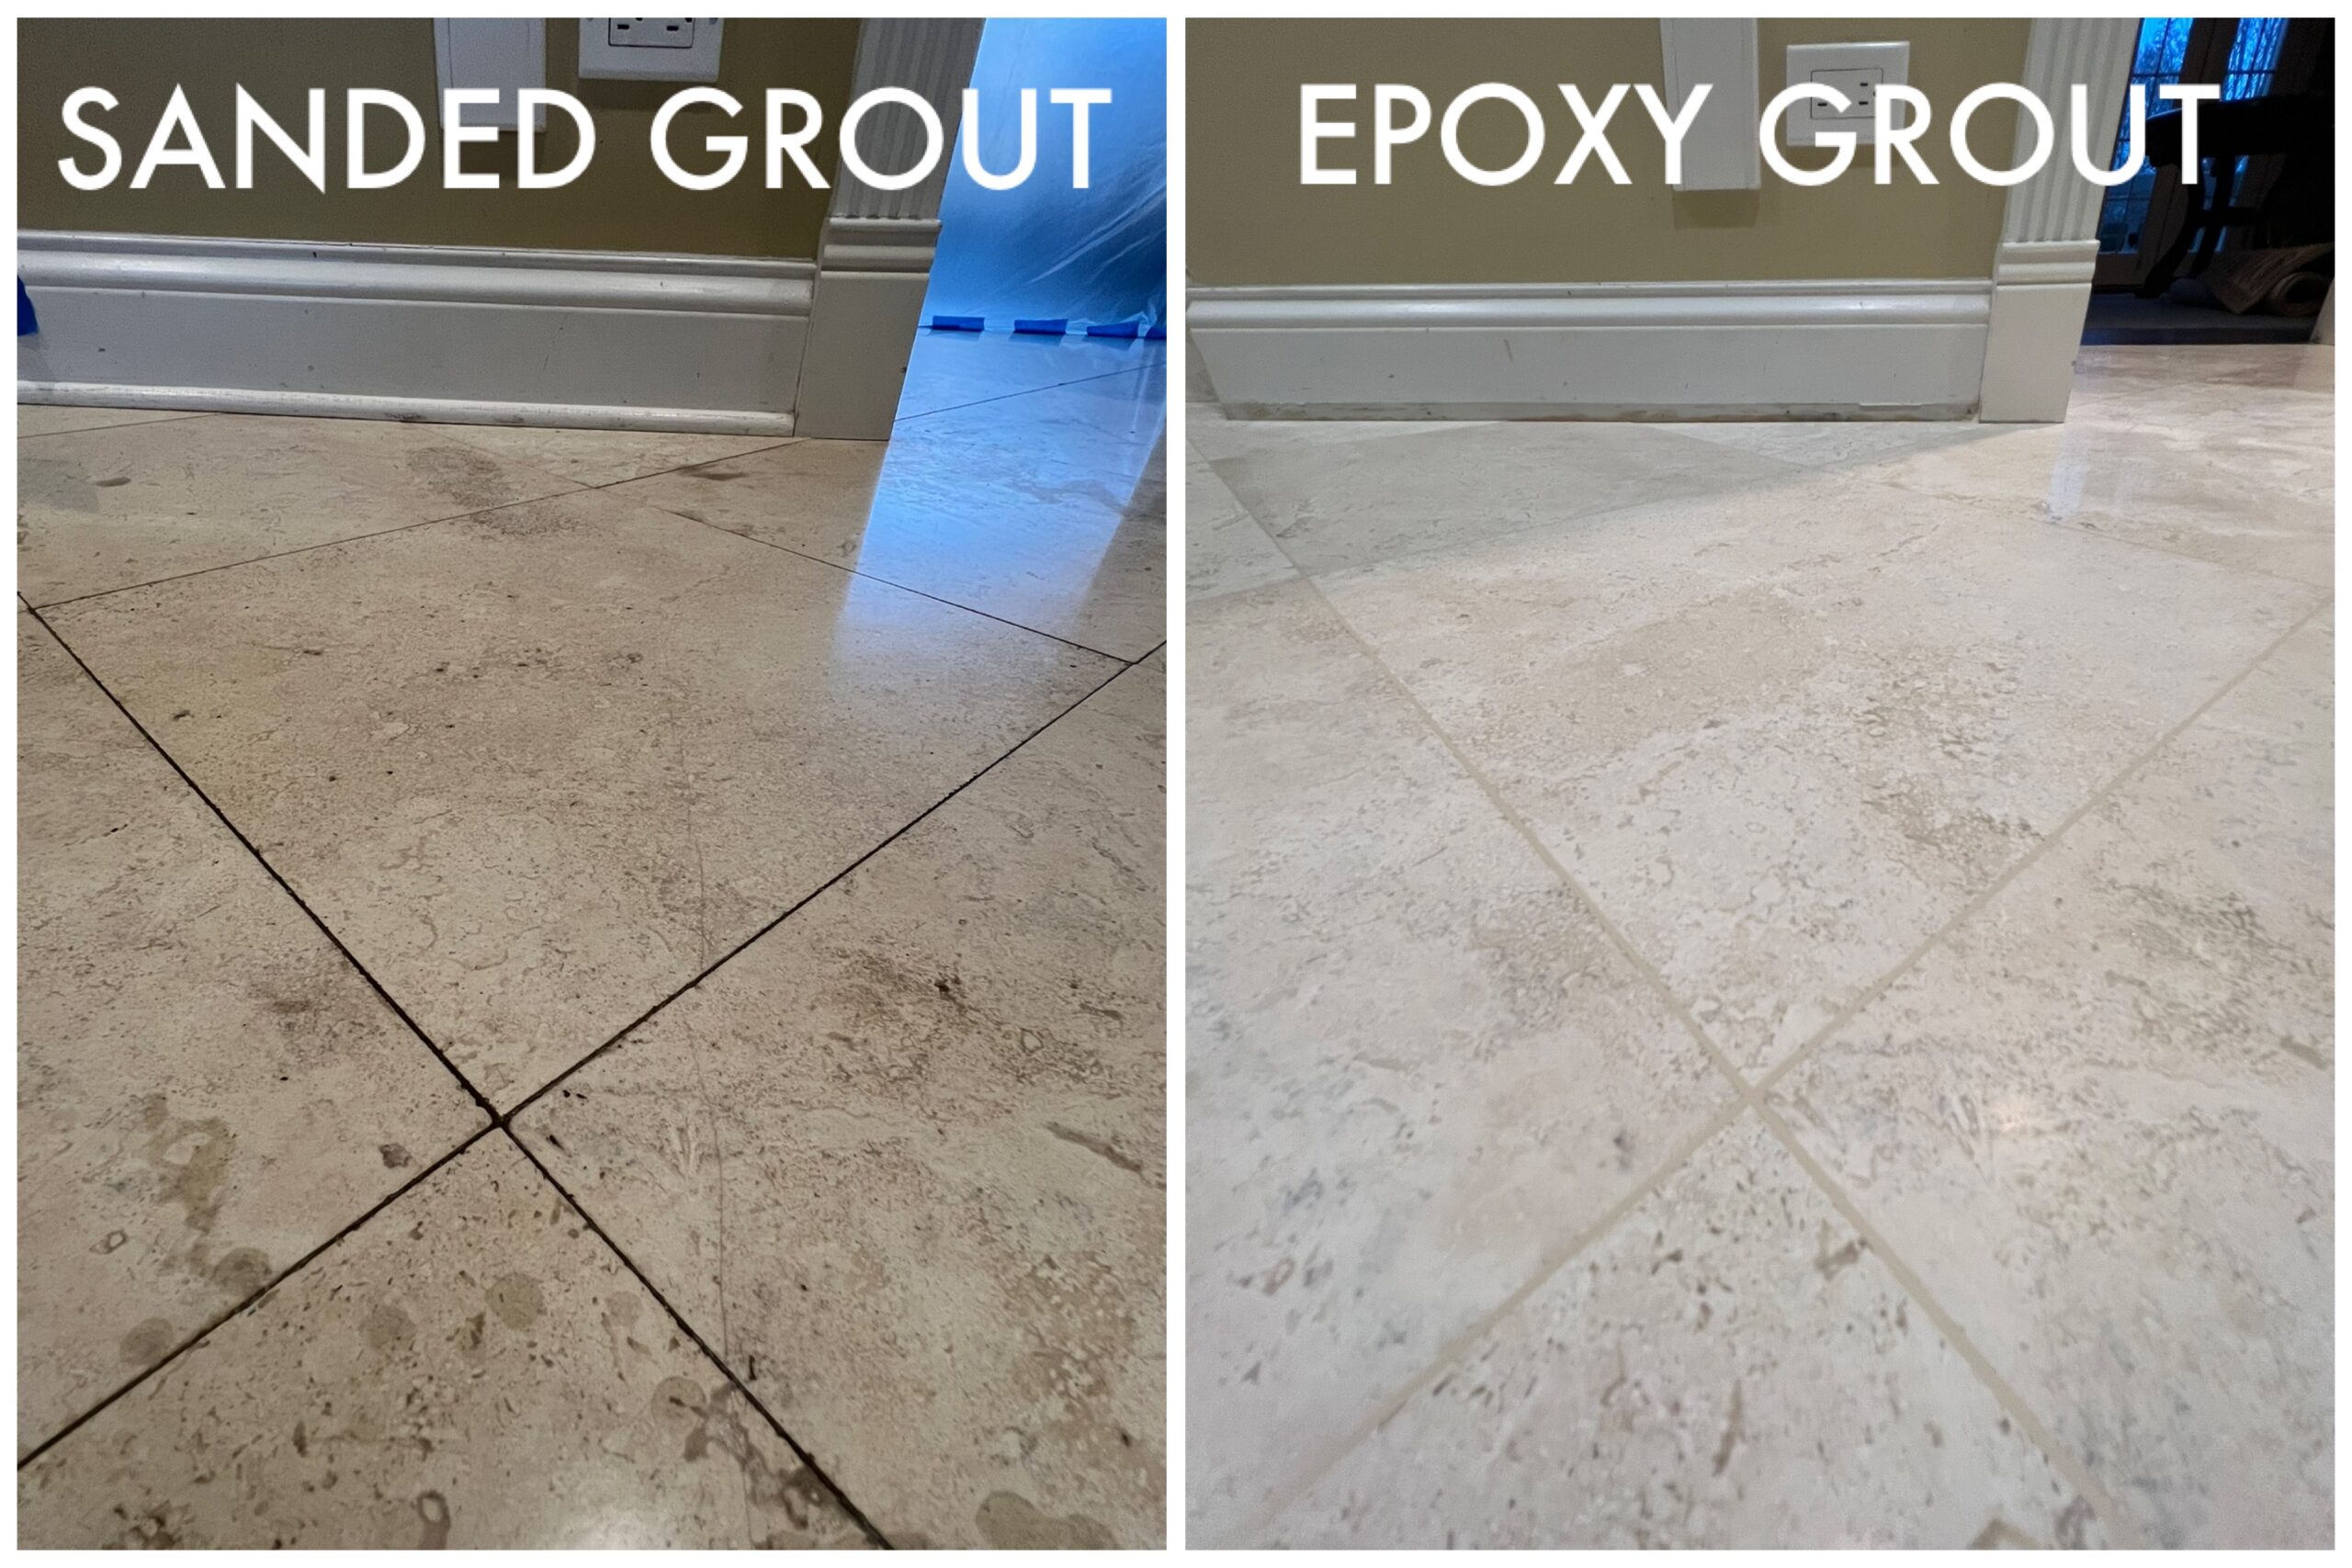 Marble or travertine tile grout: Why choose epoxy grout when it comes to a natural stone tile floor